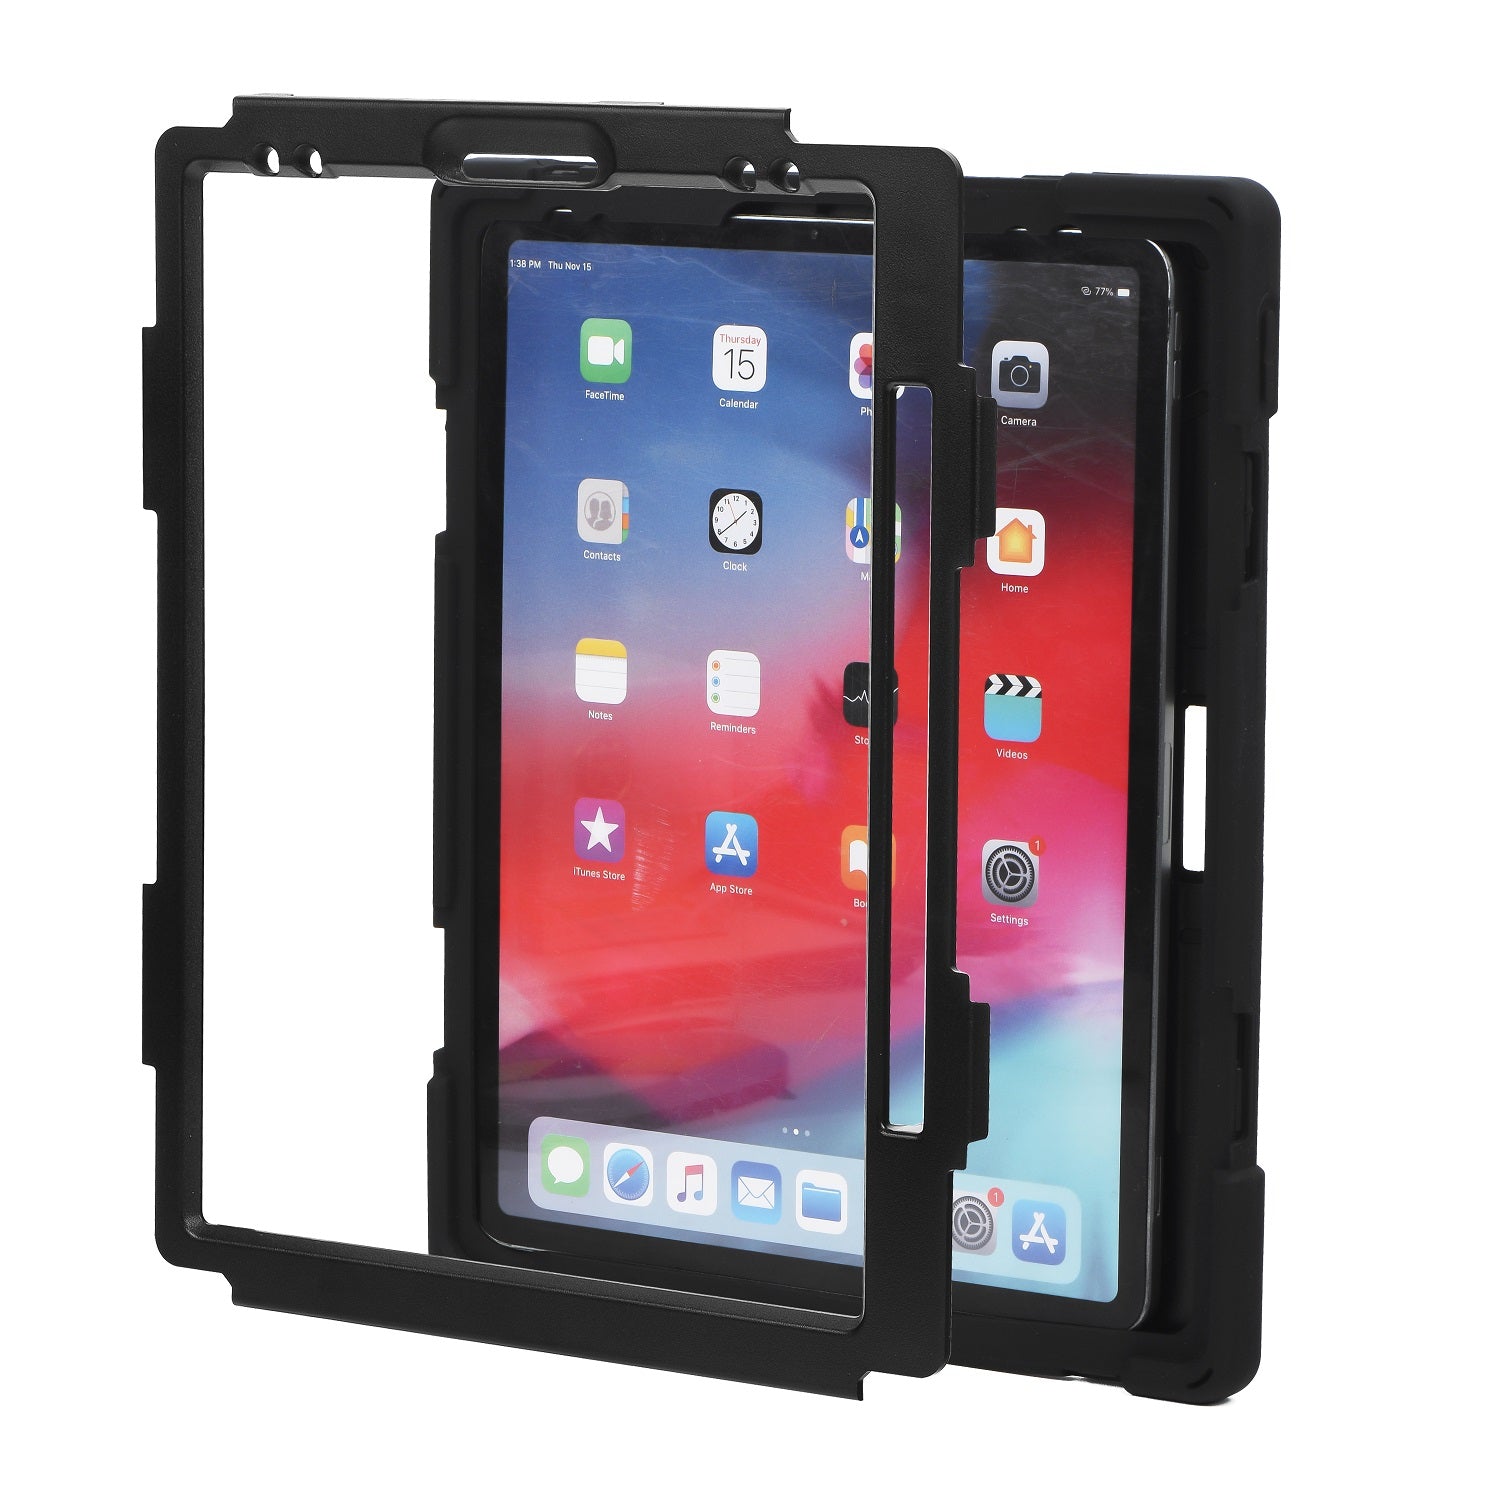 Cooper Bounce Strap Rugged case with Strap & Kickstand for iPad